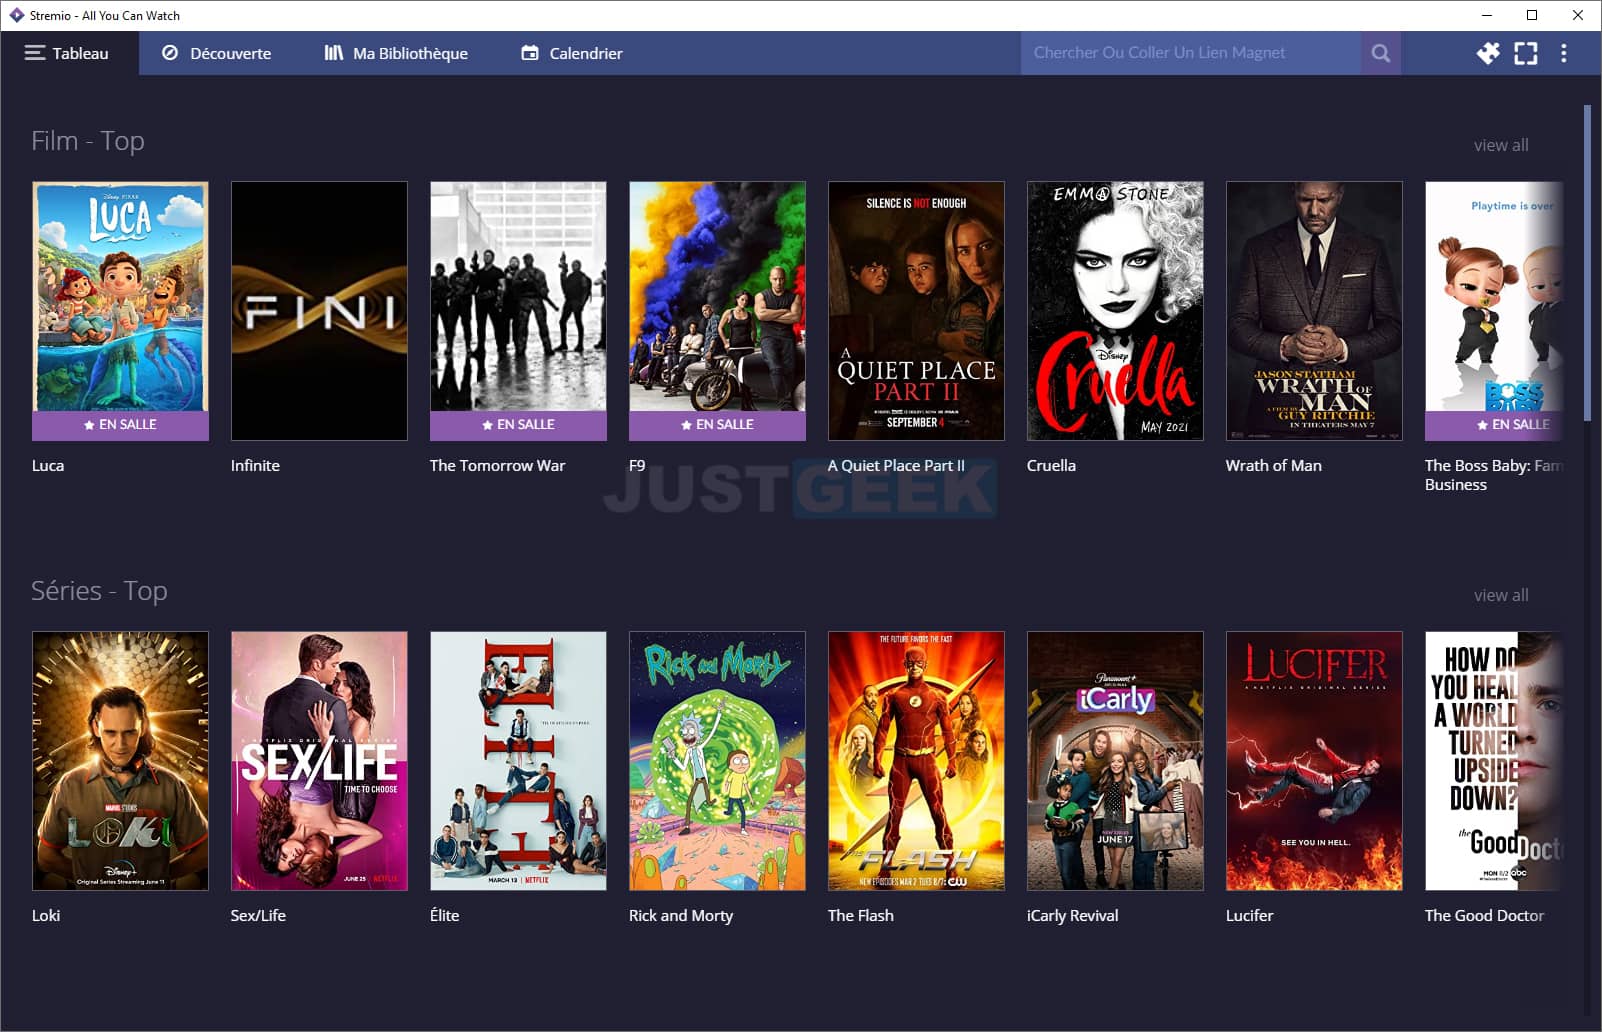 Stremio: watch a movie or series in free streaming